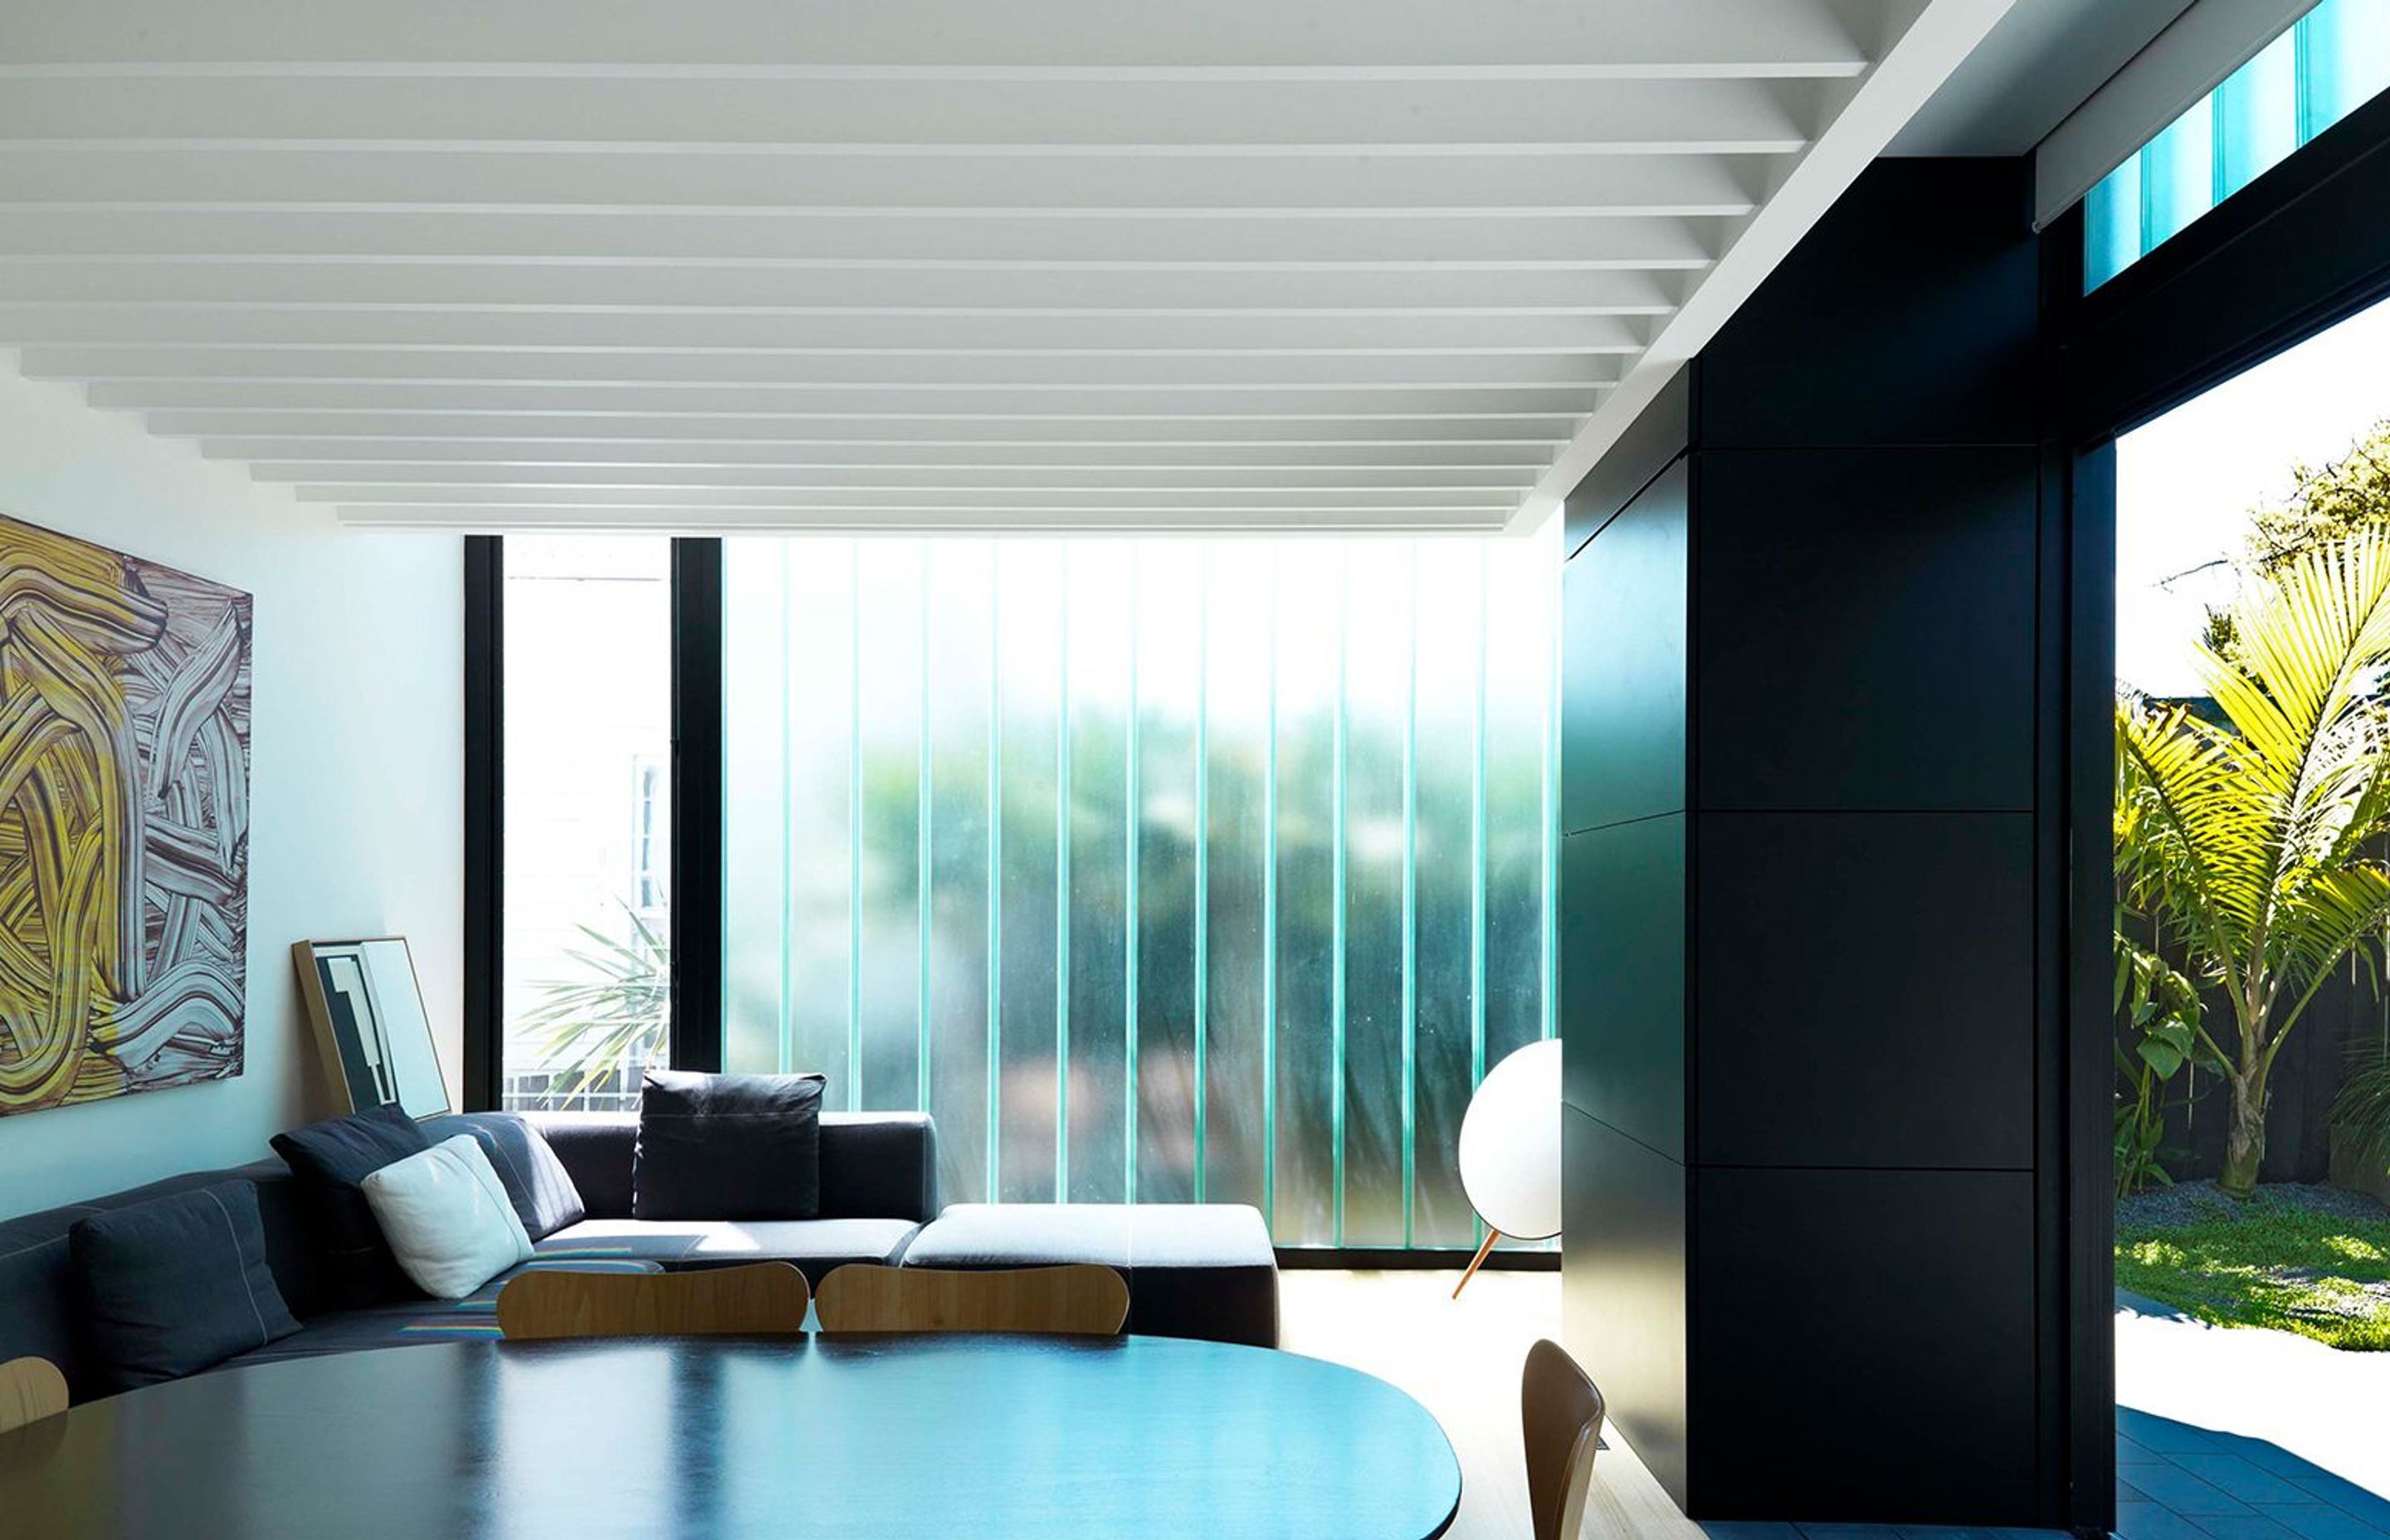 A BBQ unit is concealed behind a vertical bi-folding enclosure, clad in black steel. To the reverse side of the BBQ unit, a TV cabinet is similarly concealed to the interior.